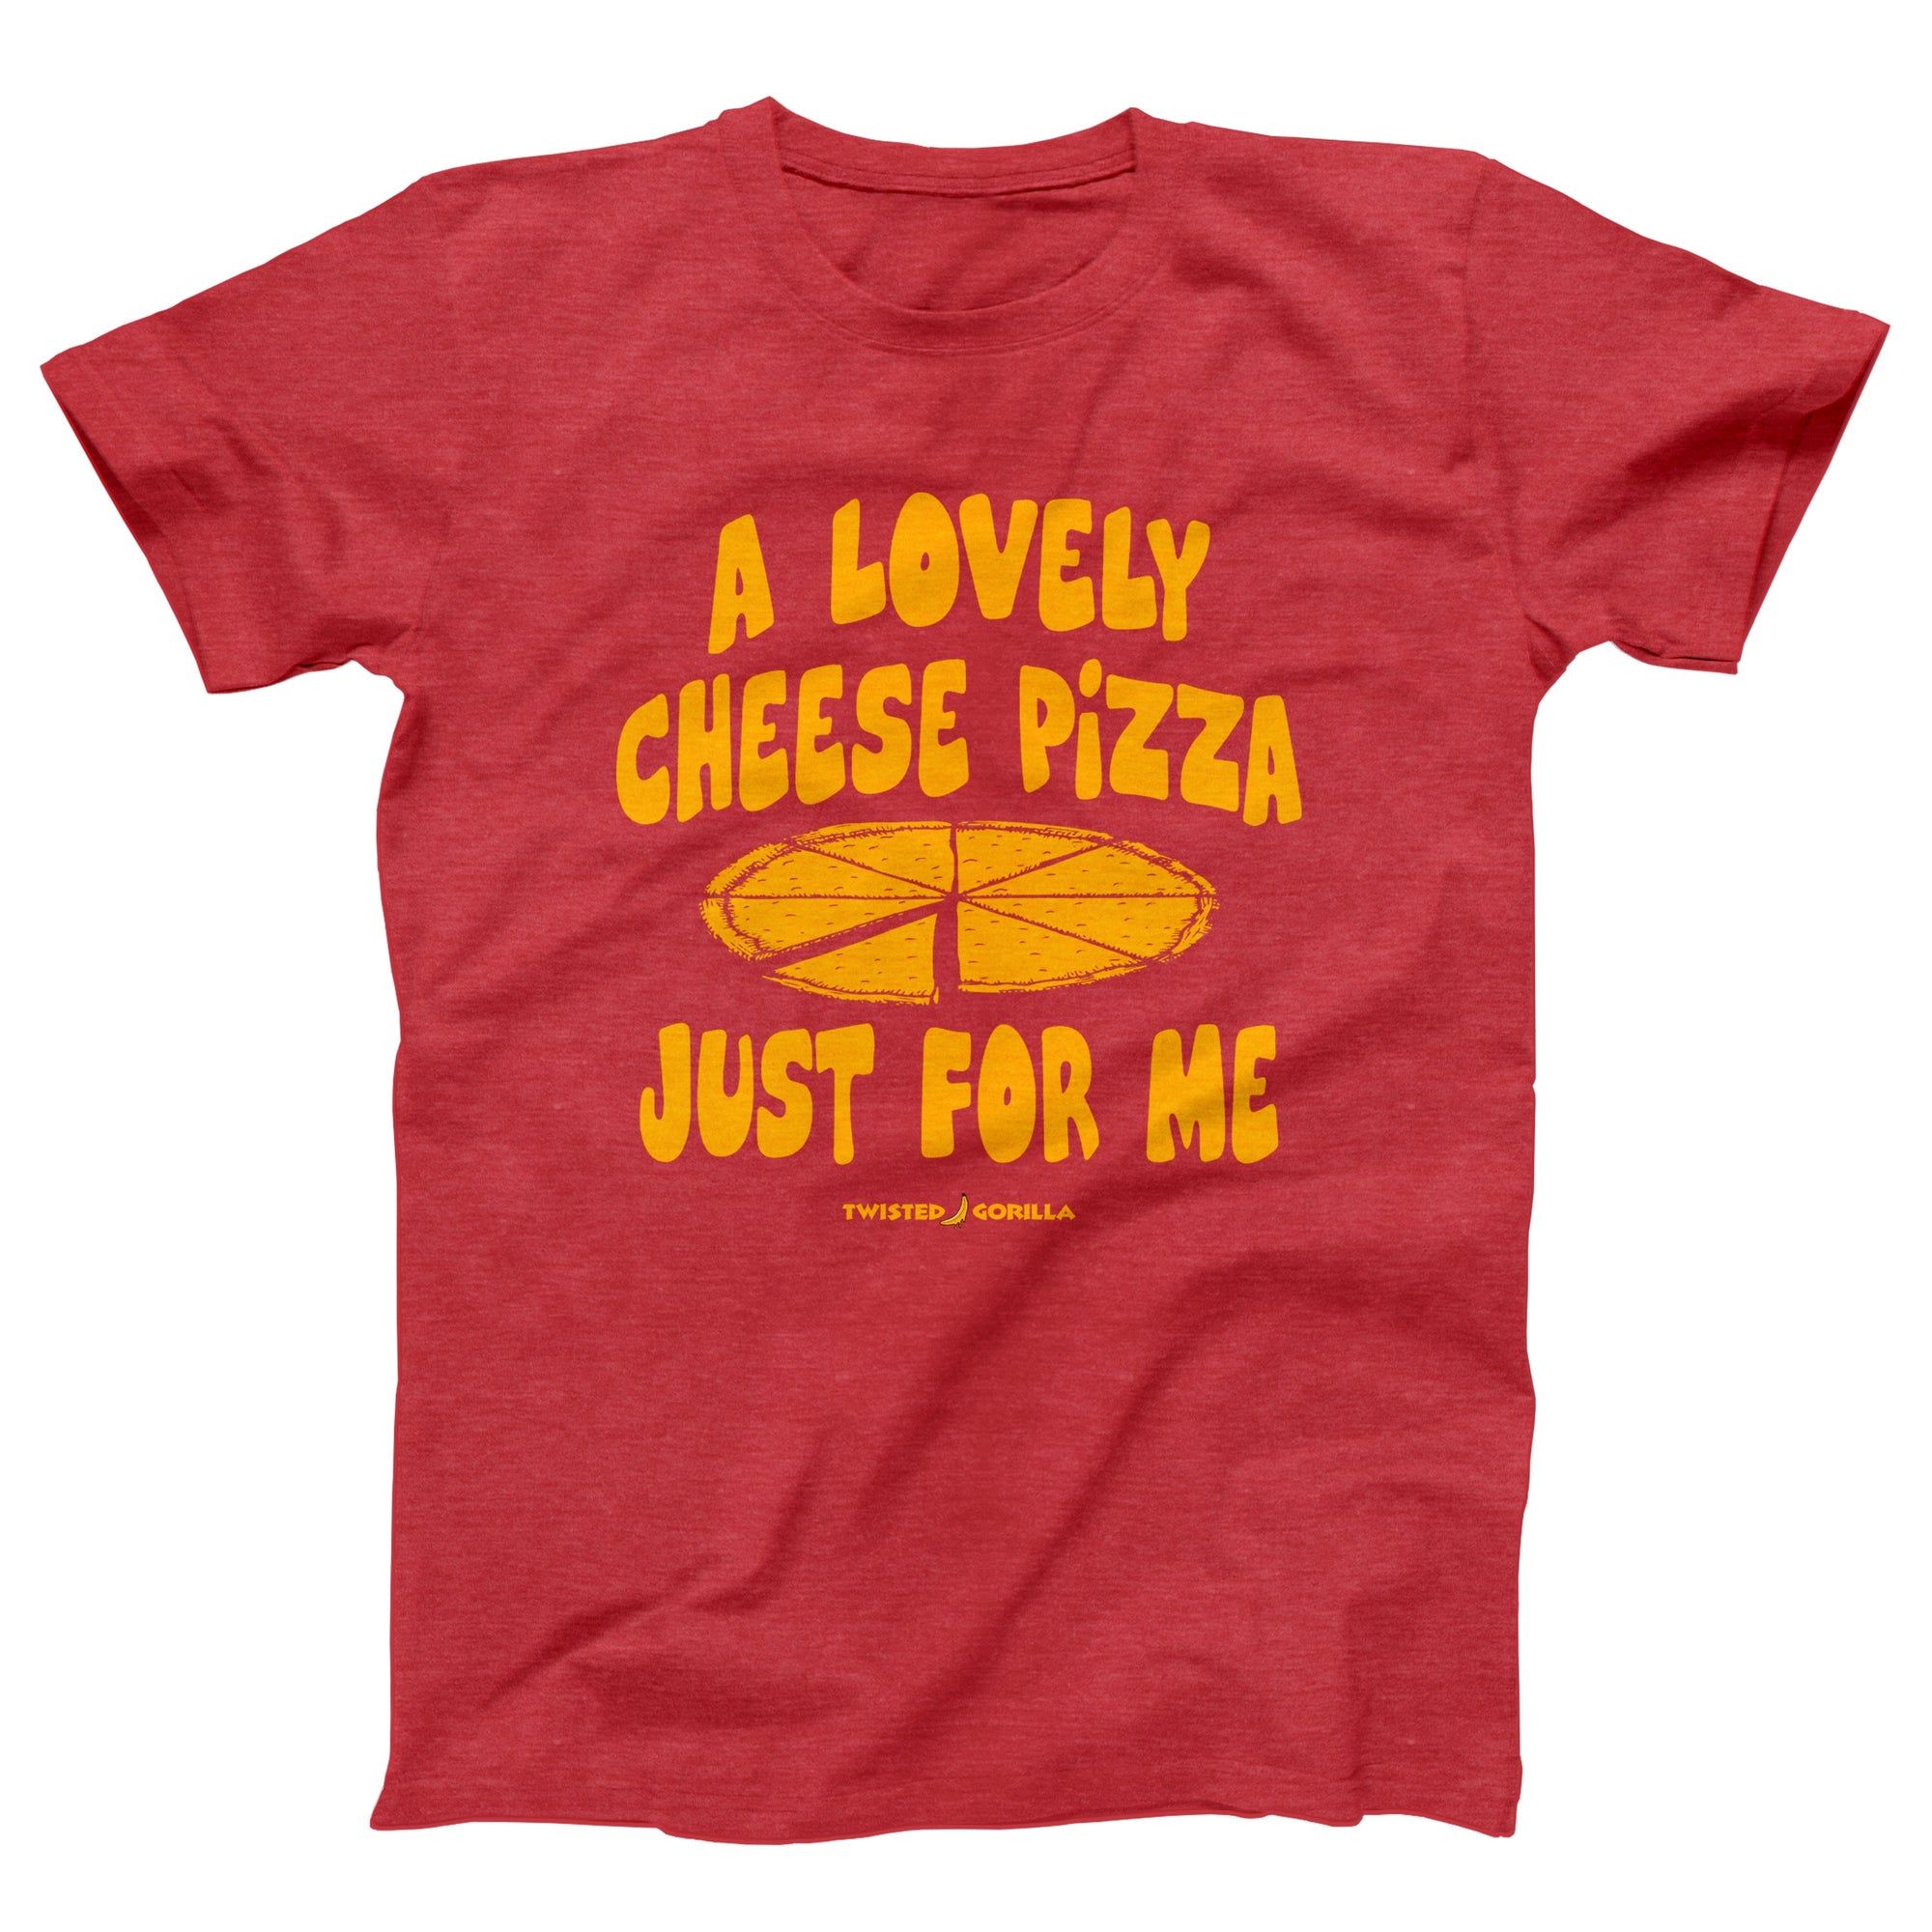 Cheese Pizza Just For Me Adult Unisex T-Shirt - anishphilip